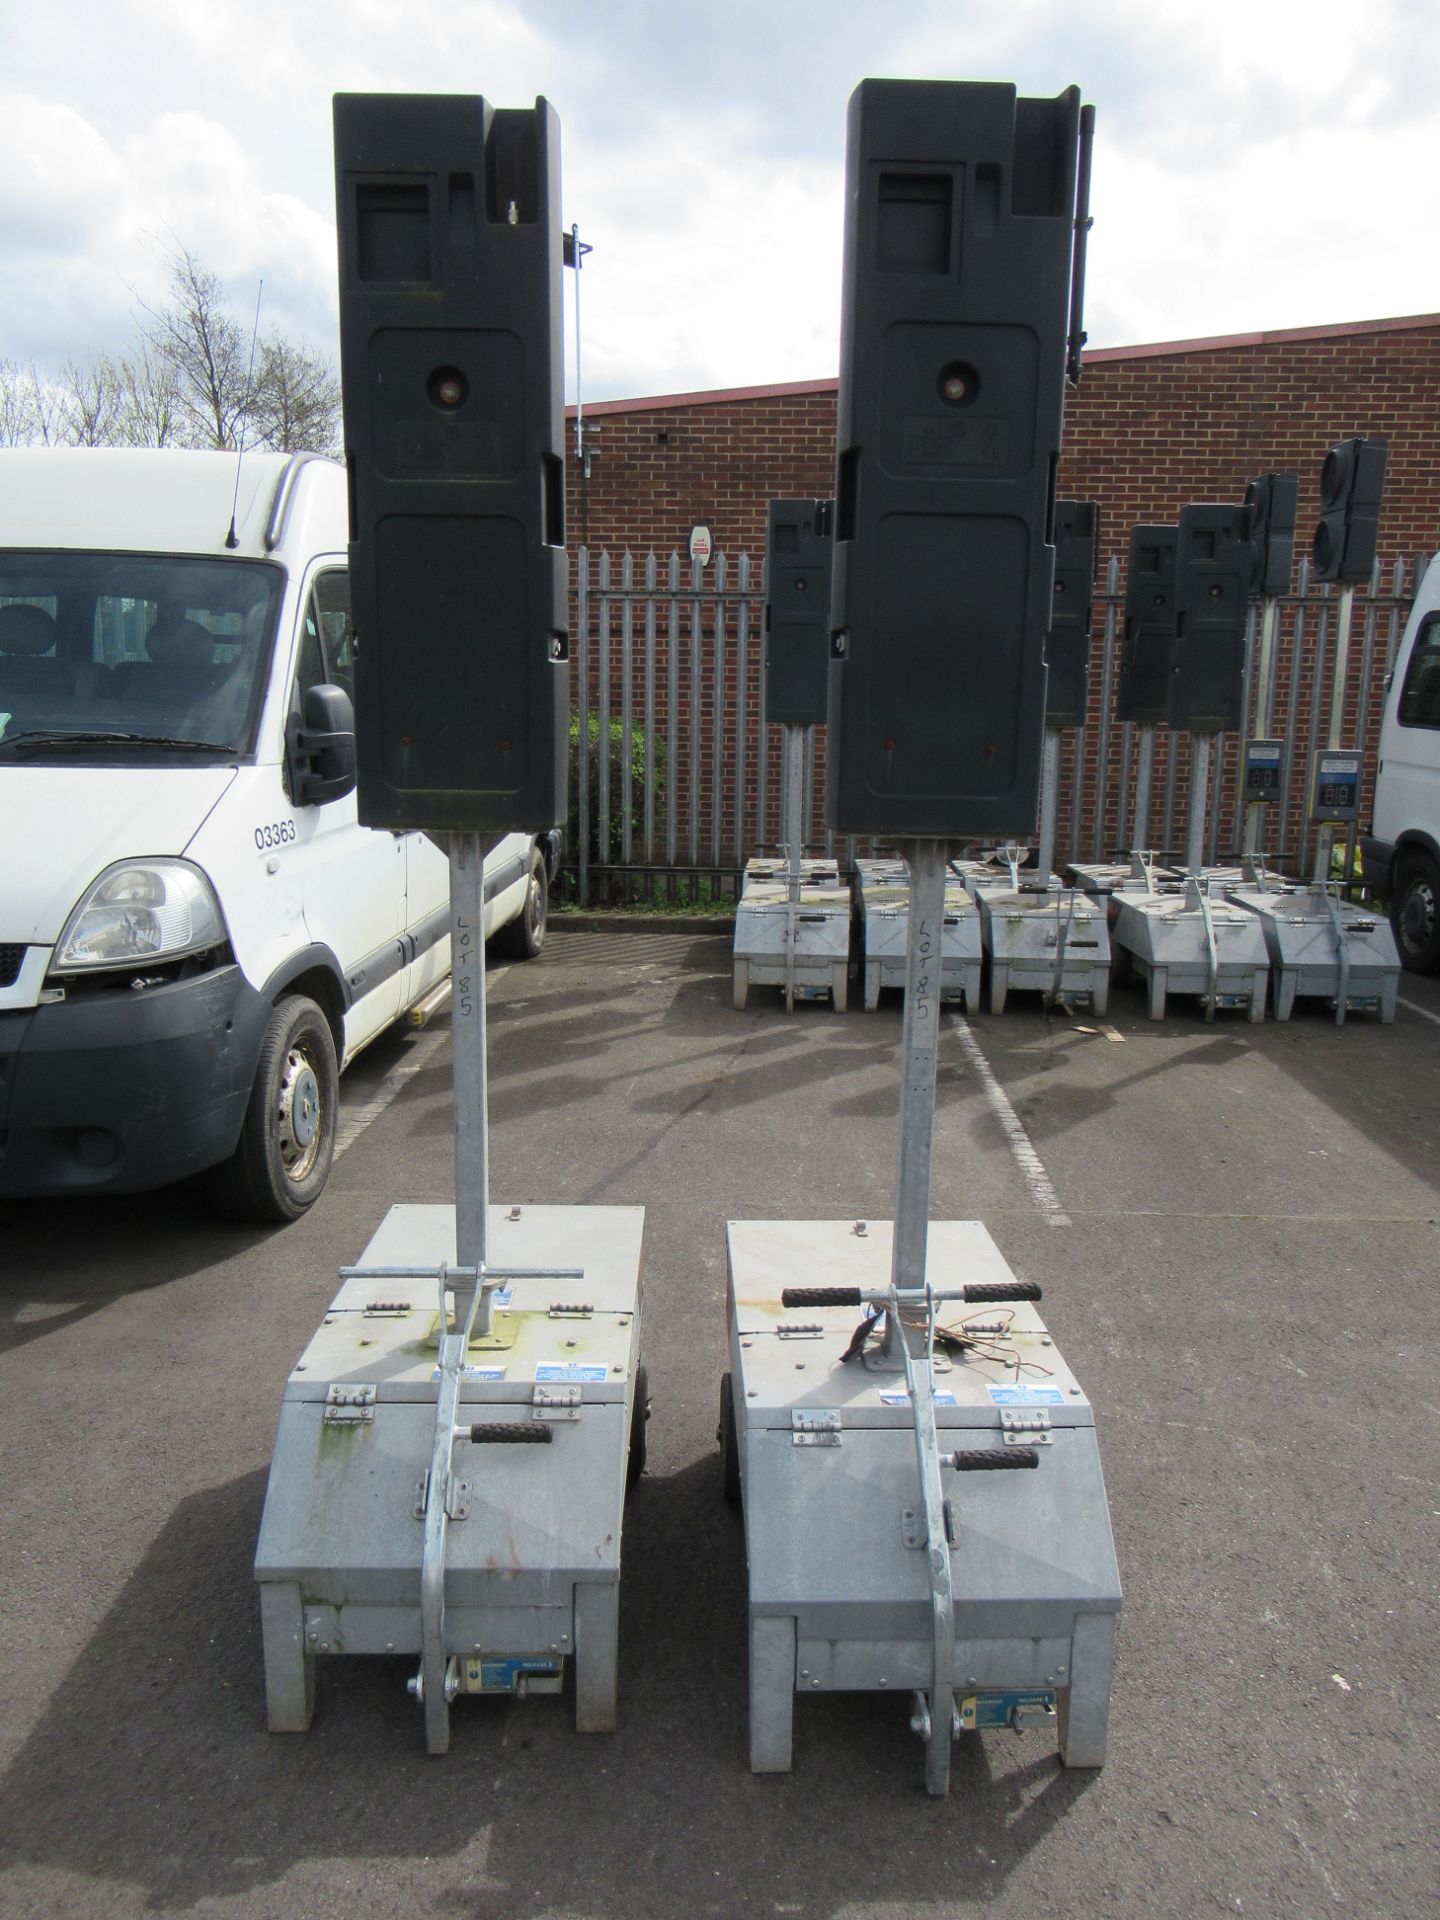 A Pair of Pike Signals Ltd "Vehicle" Battery Powered Portable Traffic Light Units